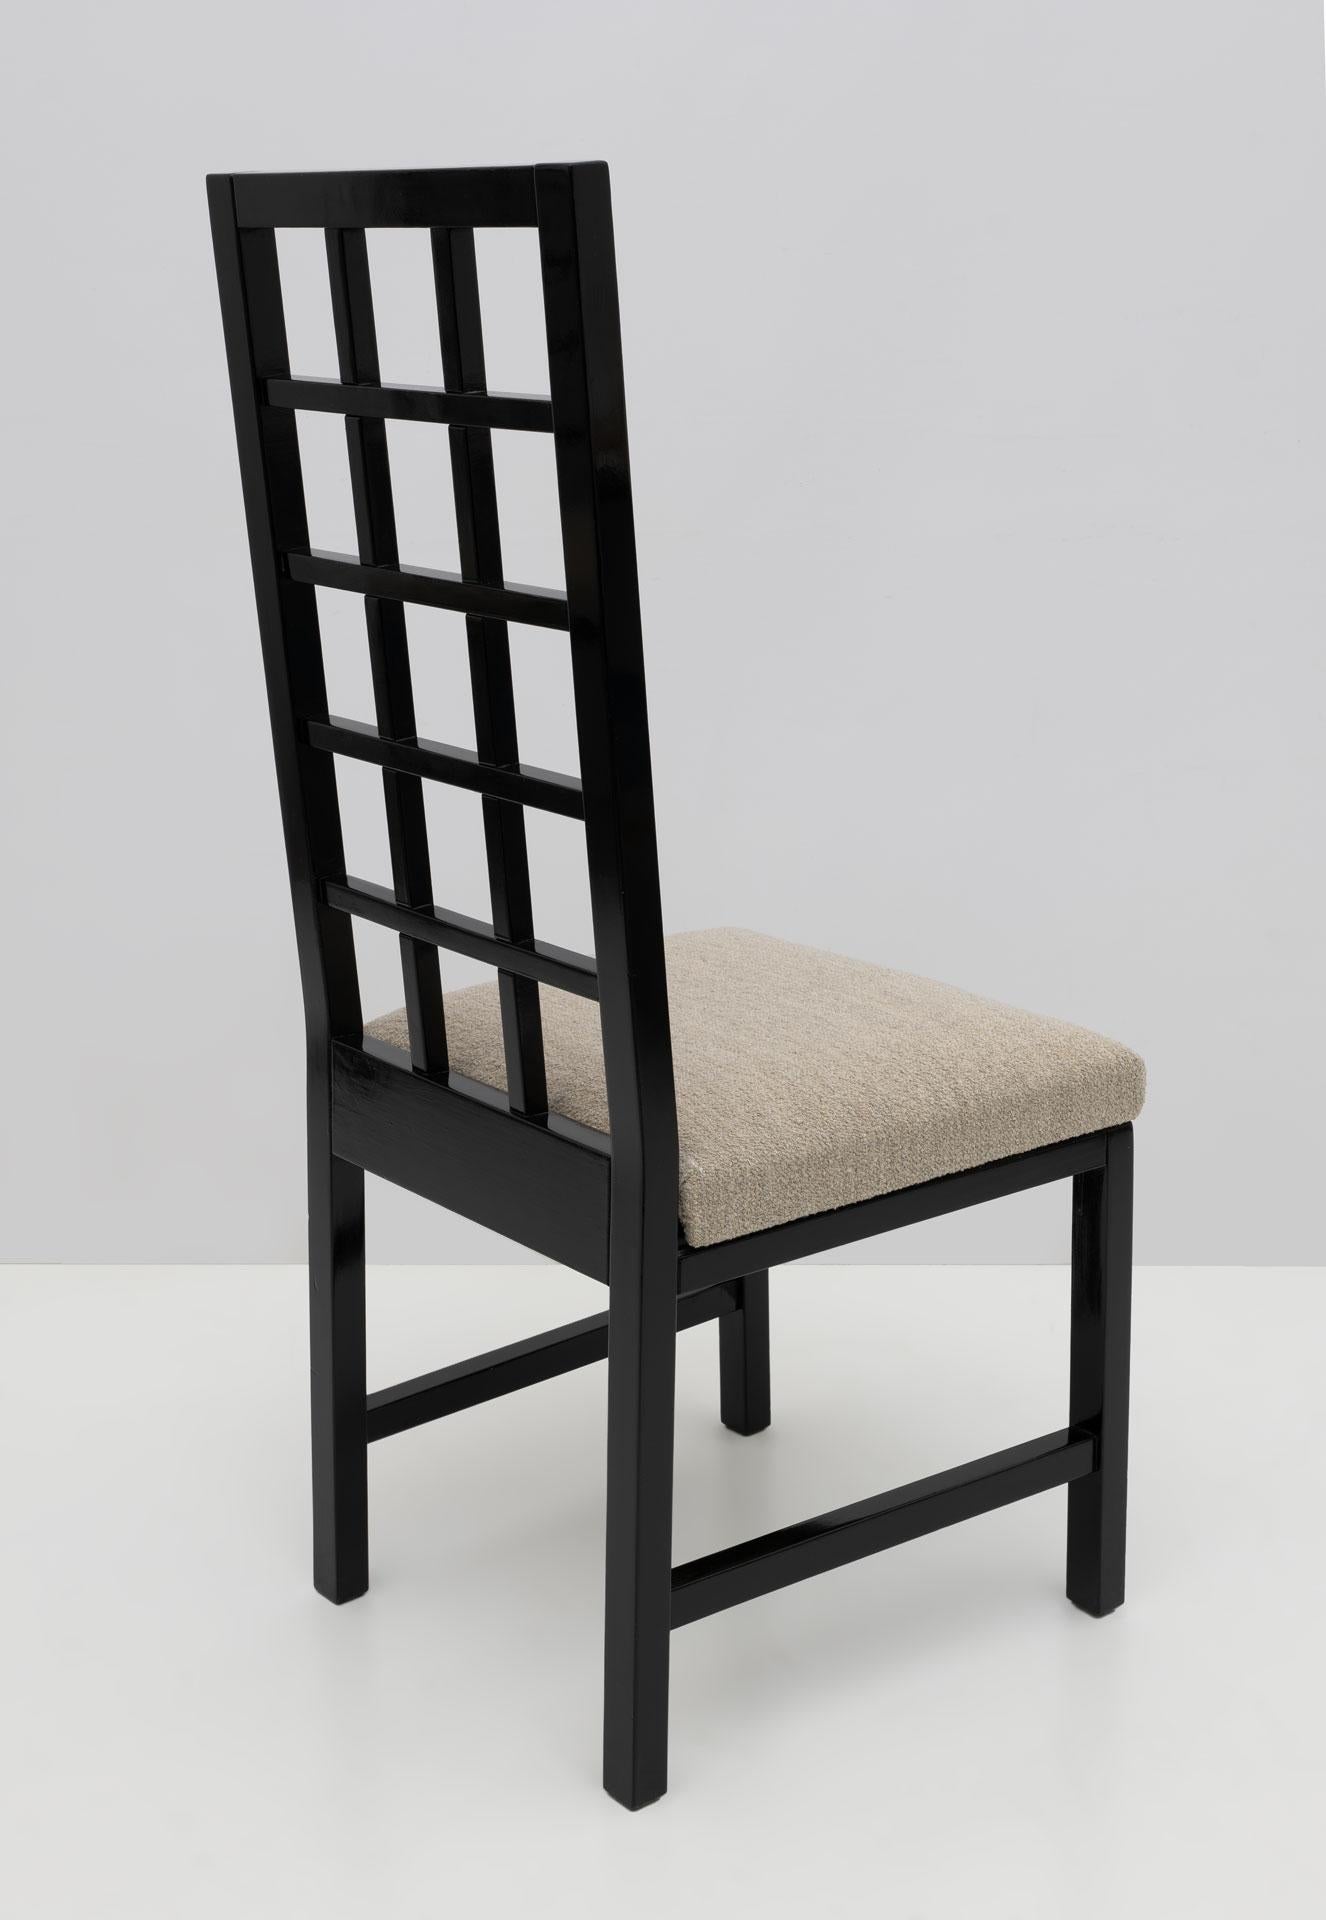 Four Mackintosh Style Black Lacquered High Back Chairs, 1979 In Good Condition For Sale In Puglia, Puglia